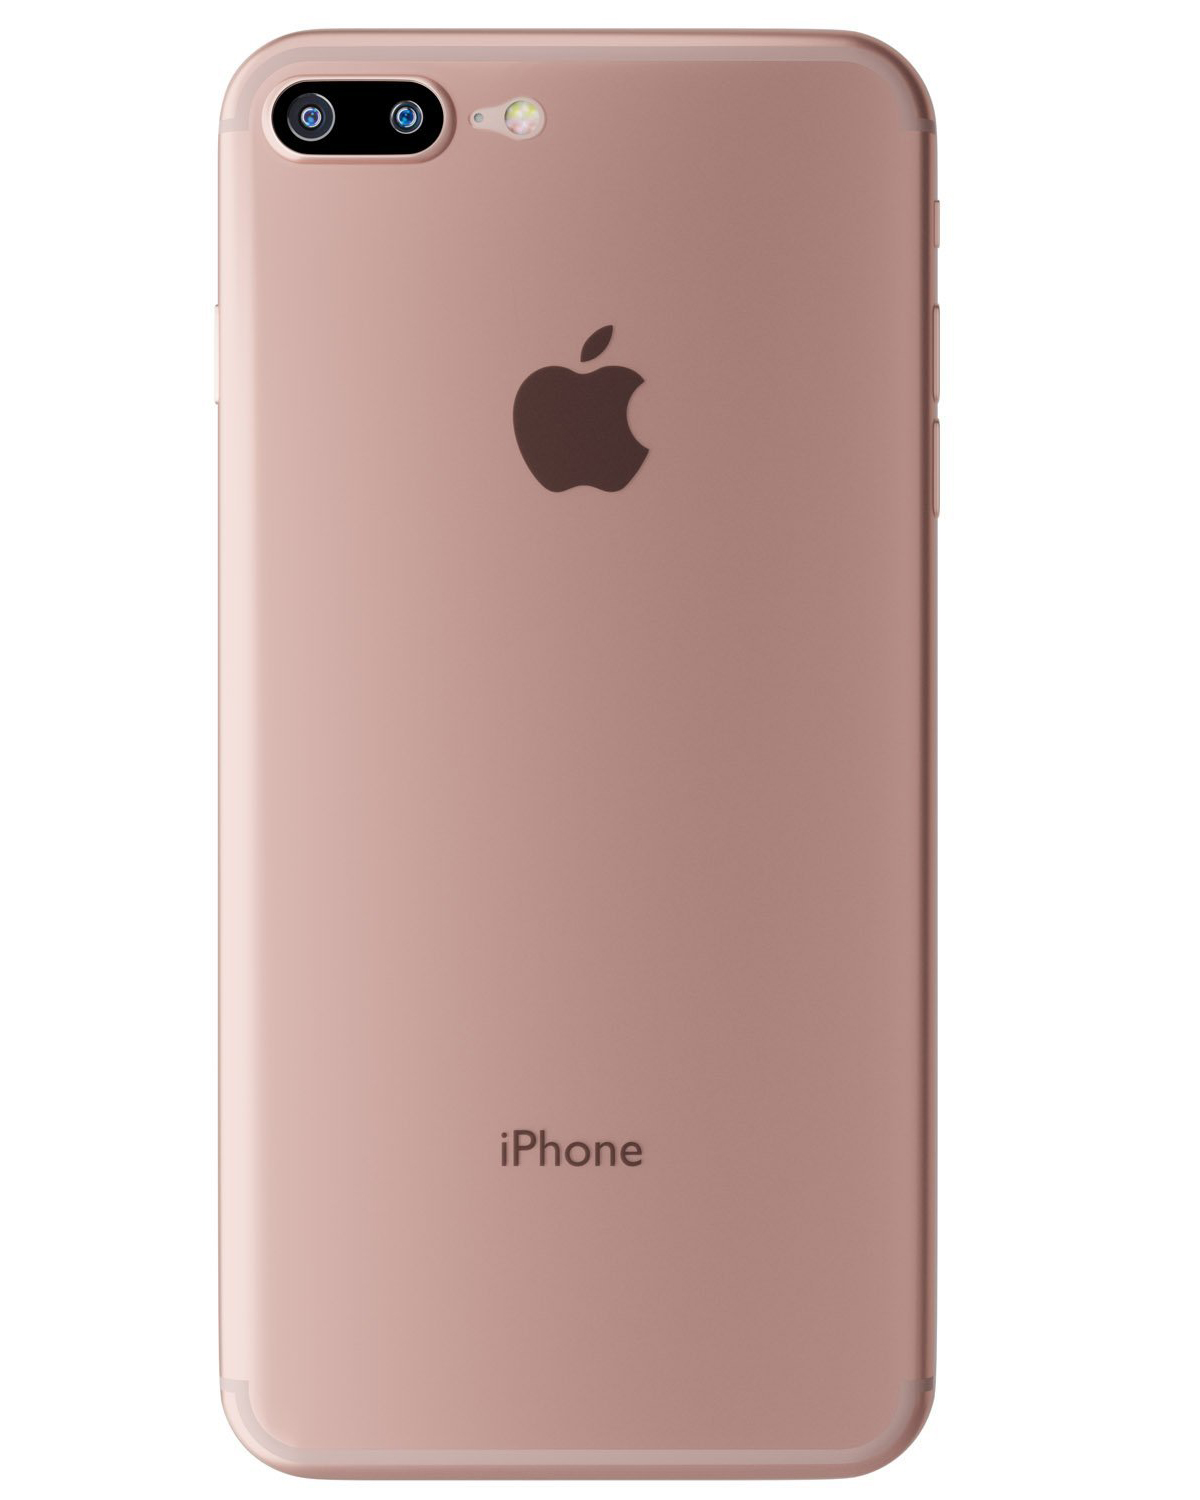 Apple Iphone 7 Plus Pictures Official Photos Whatmobile